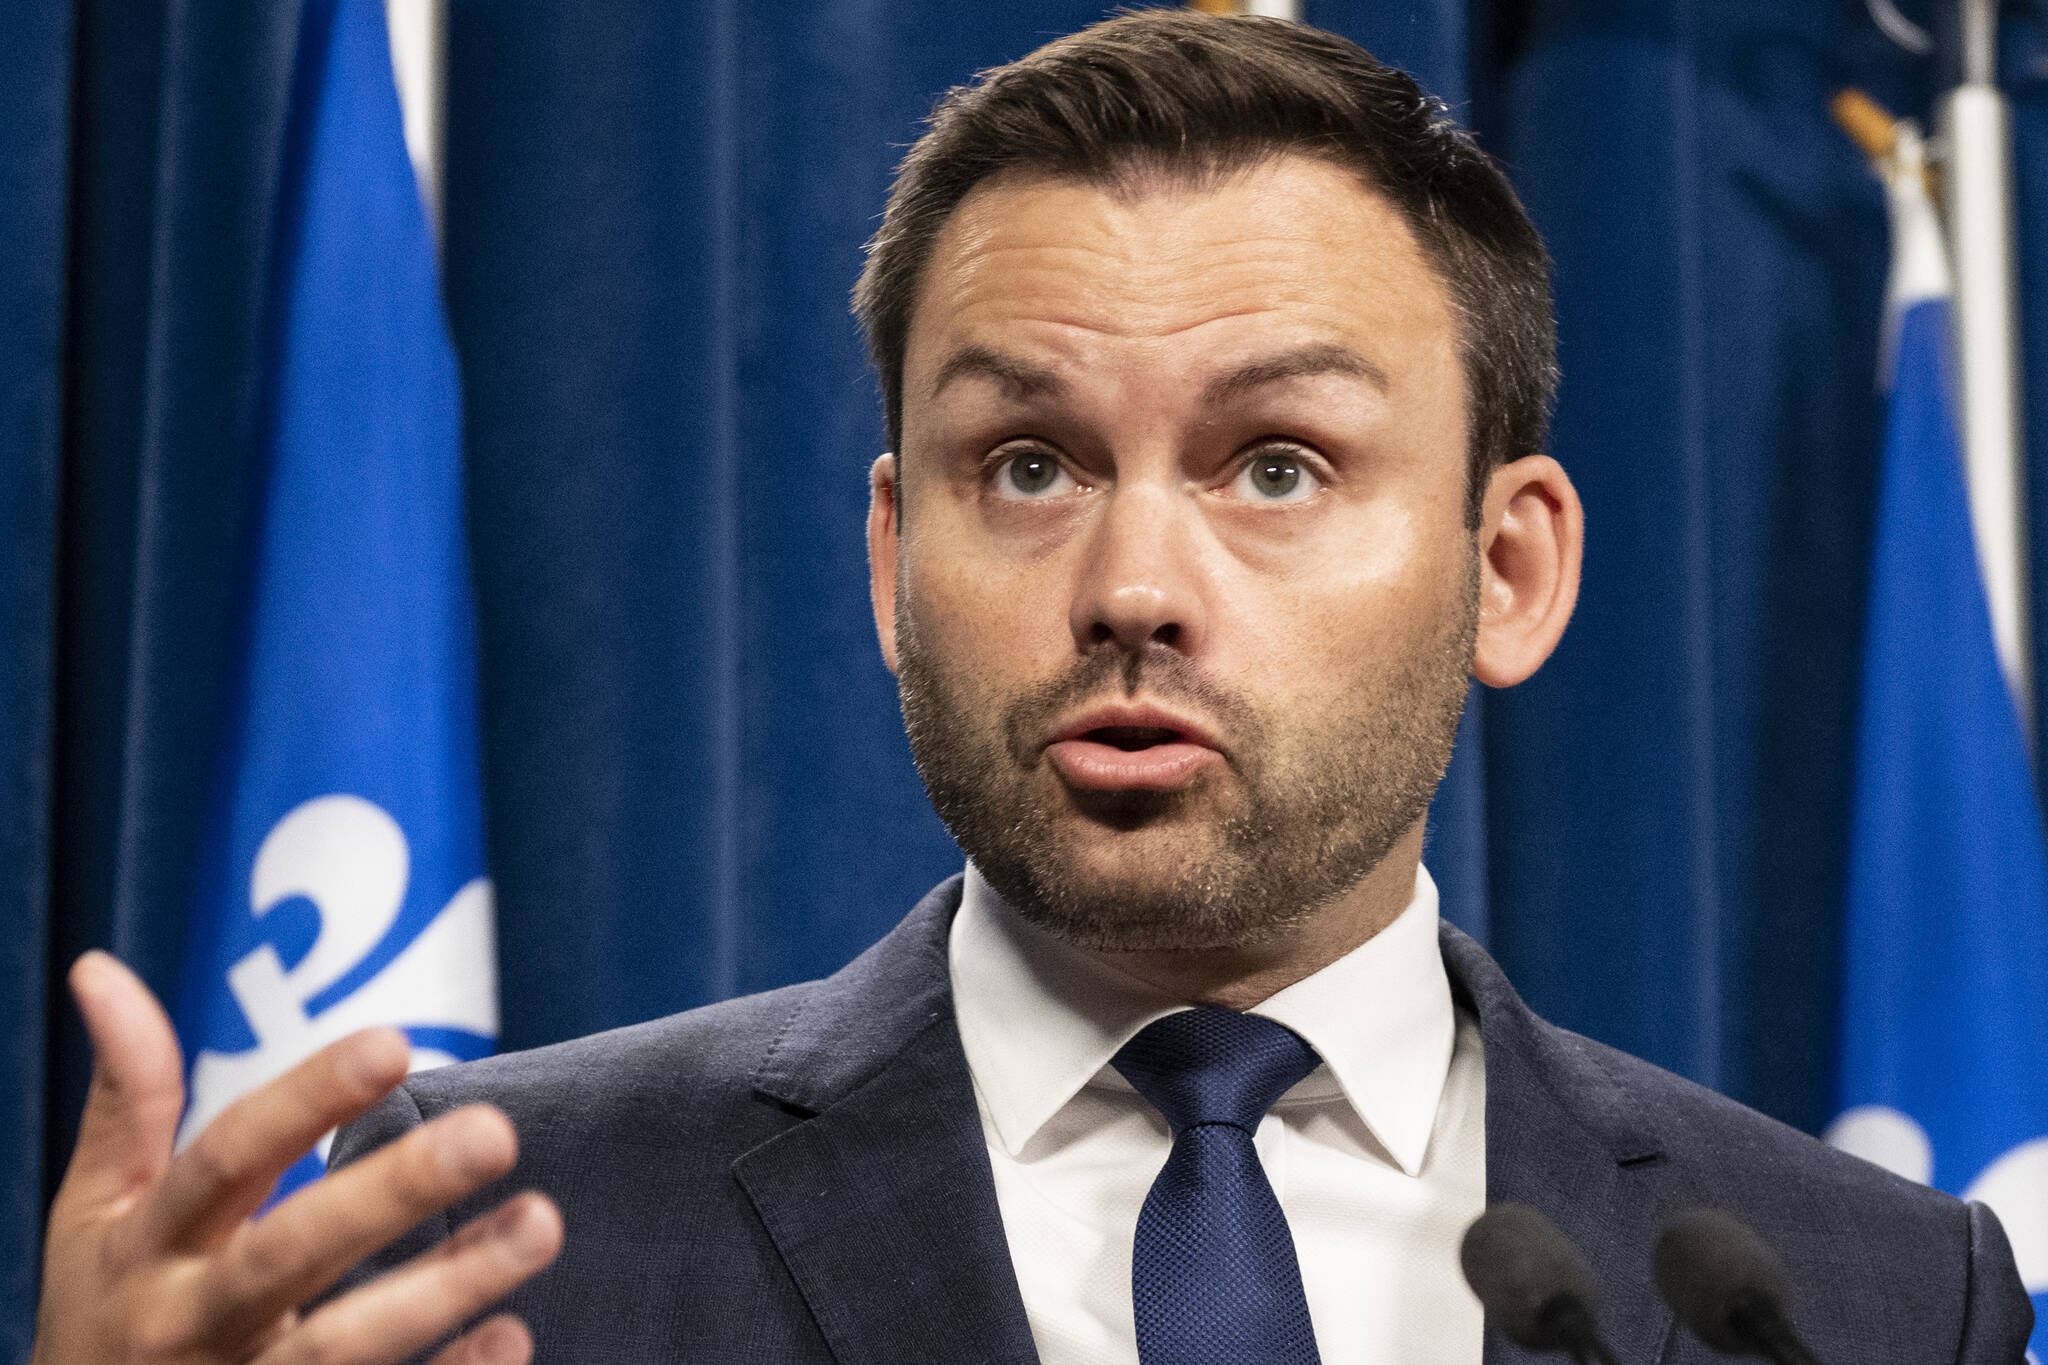 Parti Quebecois Leader Paul St-Pierre Plamondon speaks at a news conference, Monday, October 17, 2022 at the legislature in Quebec City. St-Pierre Plamondon told reporters he didn’t want to swear an oath to King Charles III. THE CANADIAN PRESS/Karoline Boucher